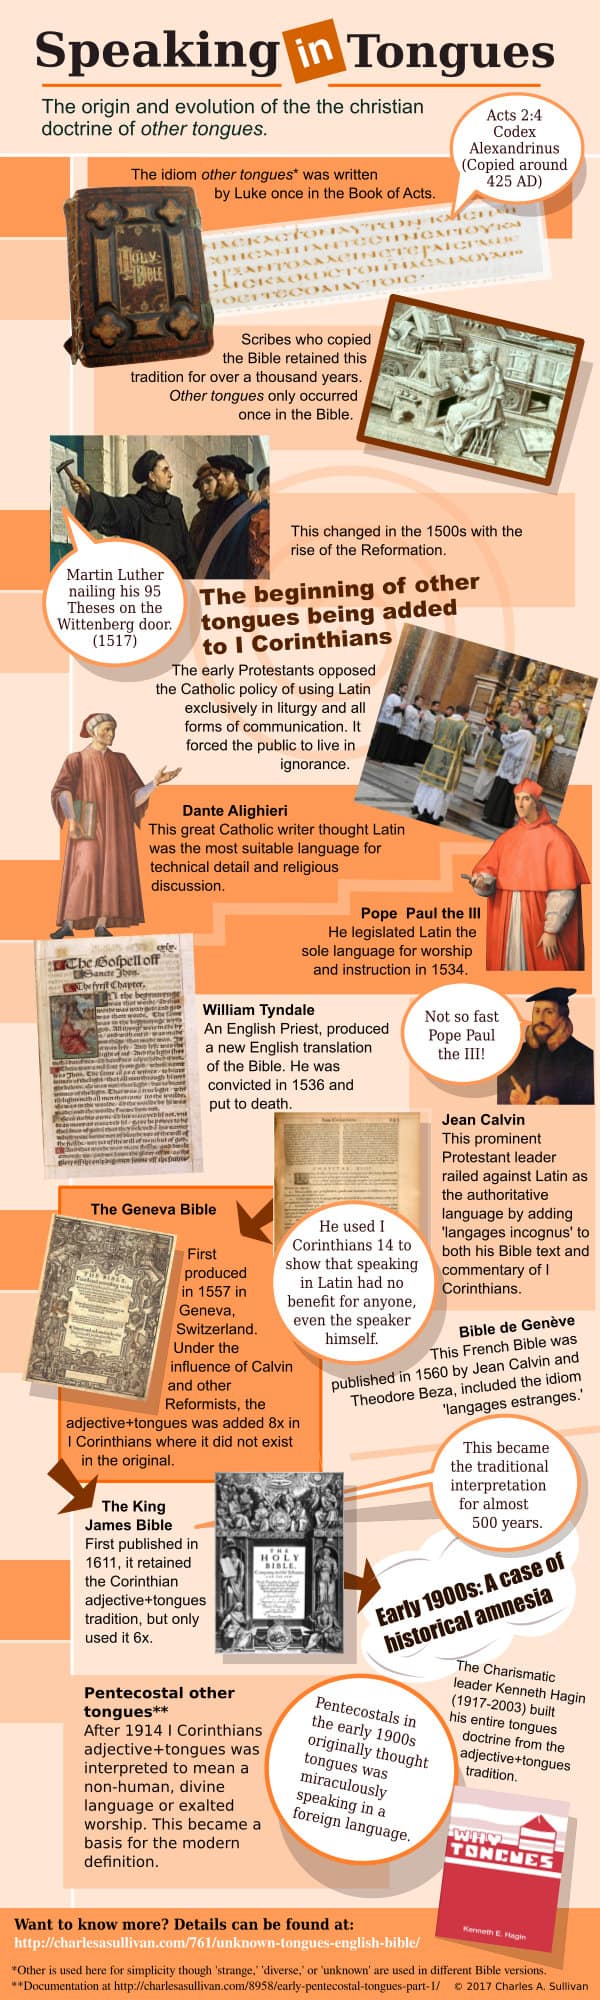 An infographic demonstrating how the other tongues traditions started in the English Bible tradition